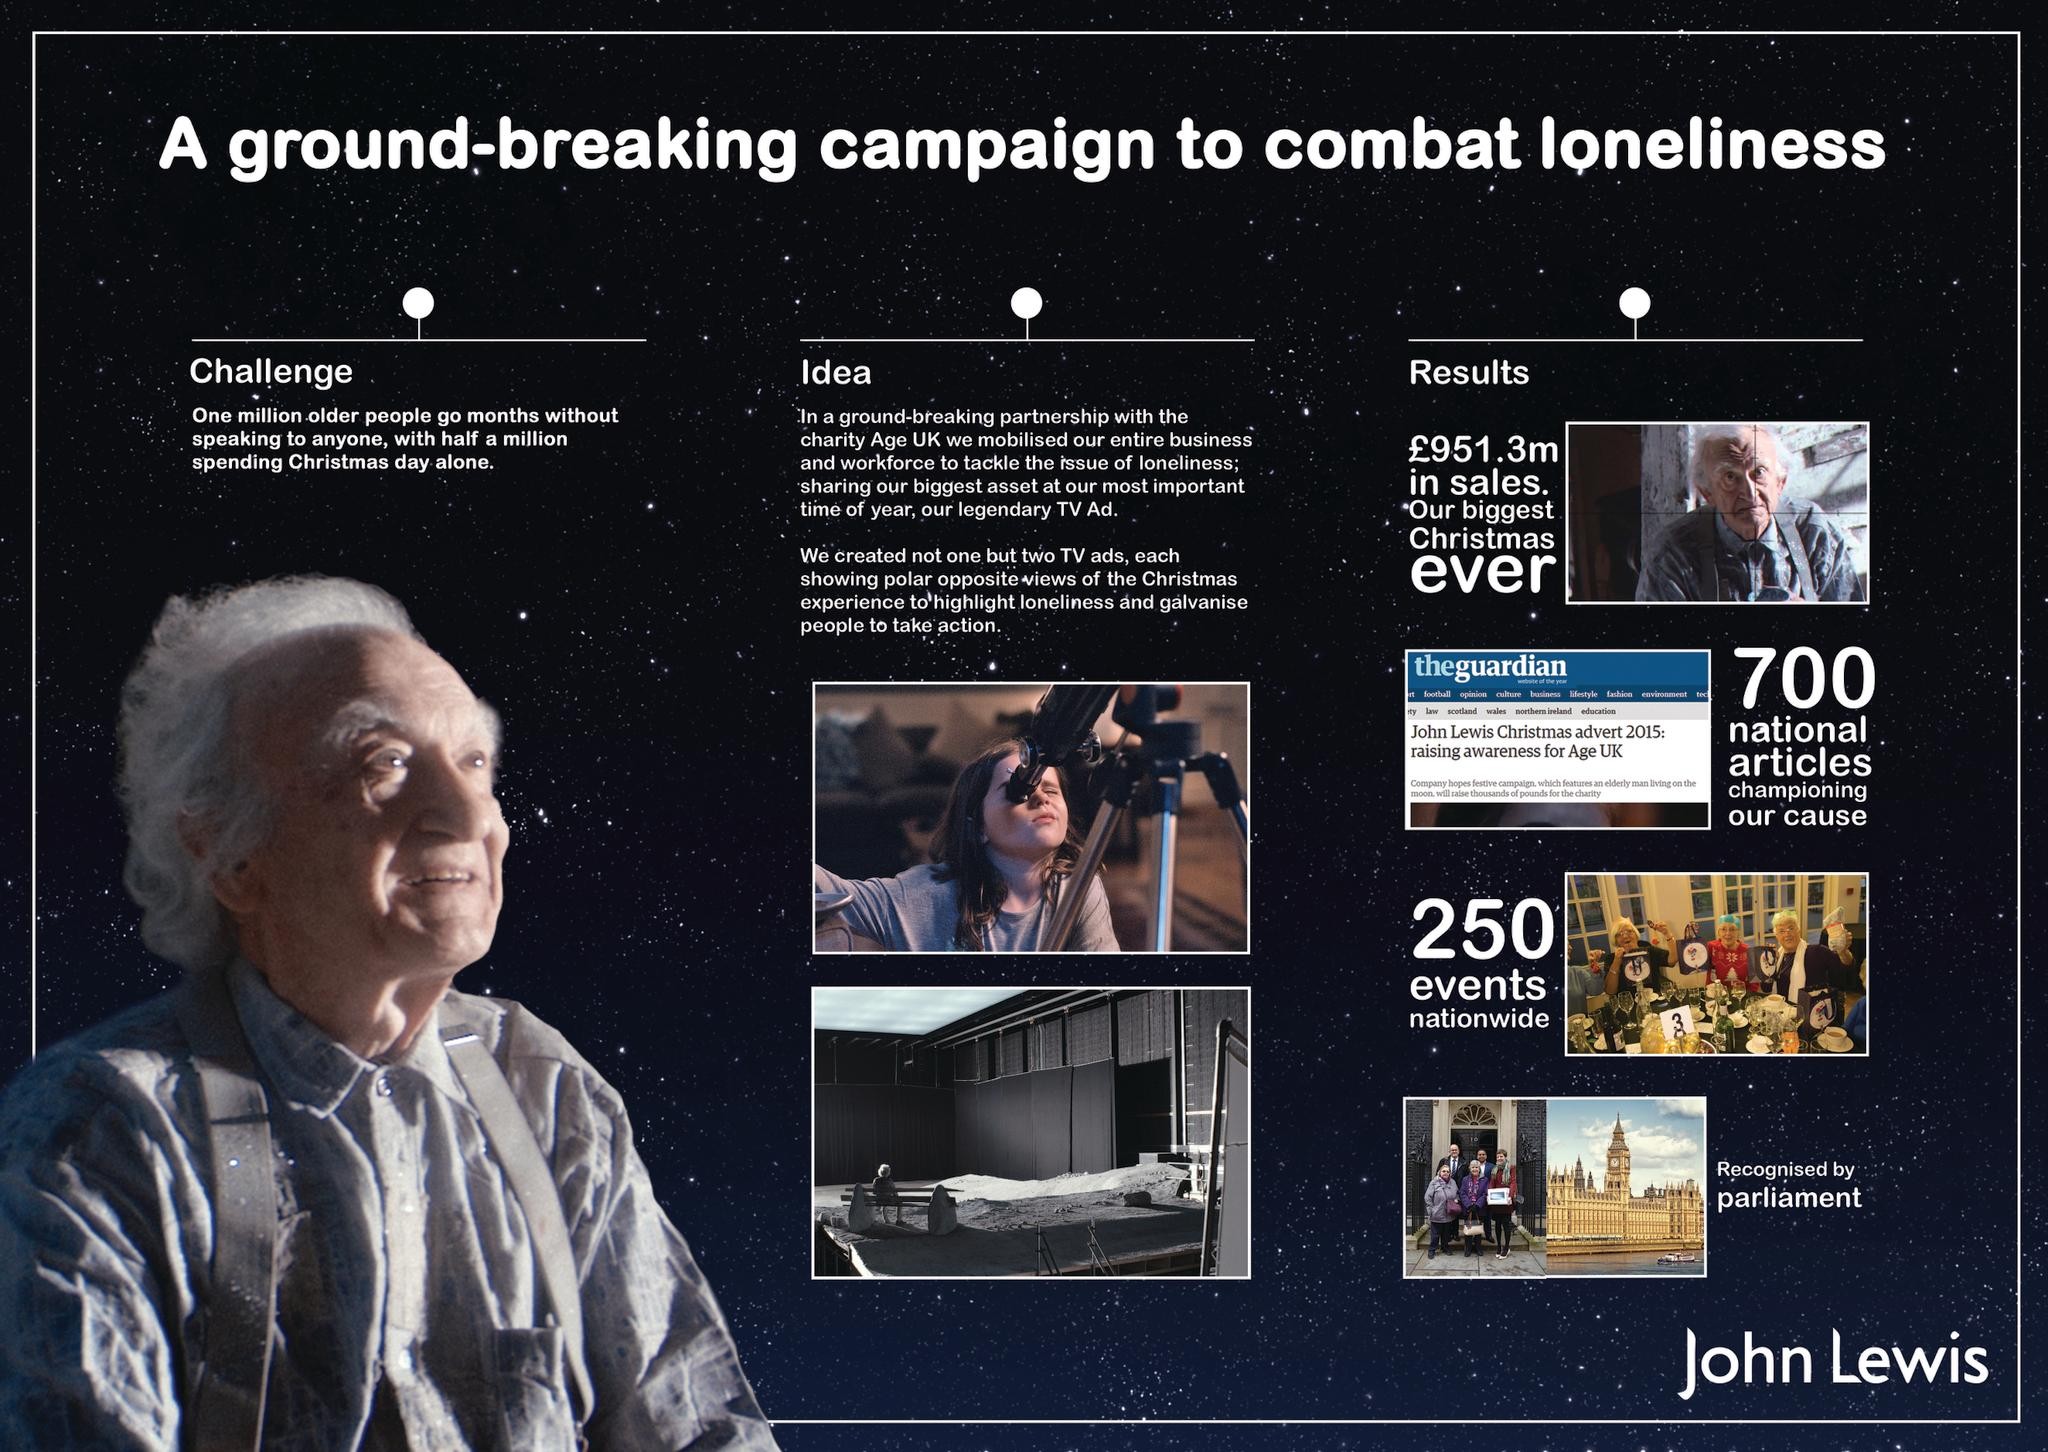 A GROUND-BREAKING CAMPAIGN TO COMBAT LONELINESS.